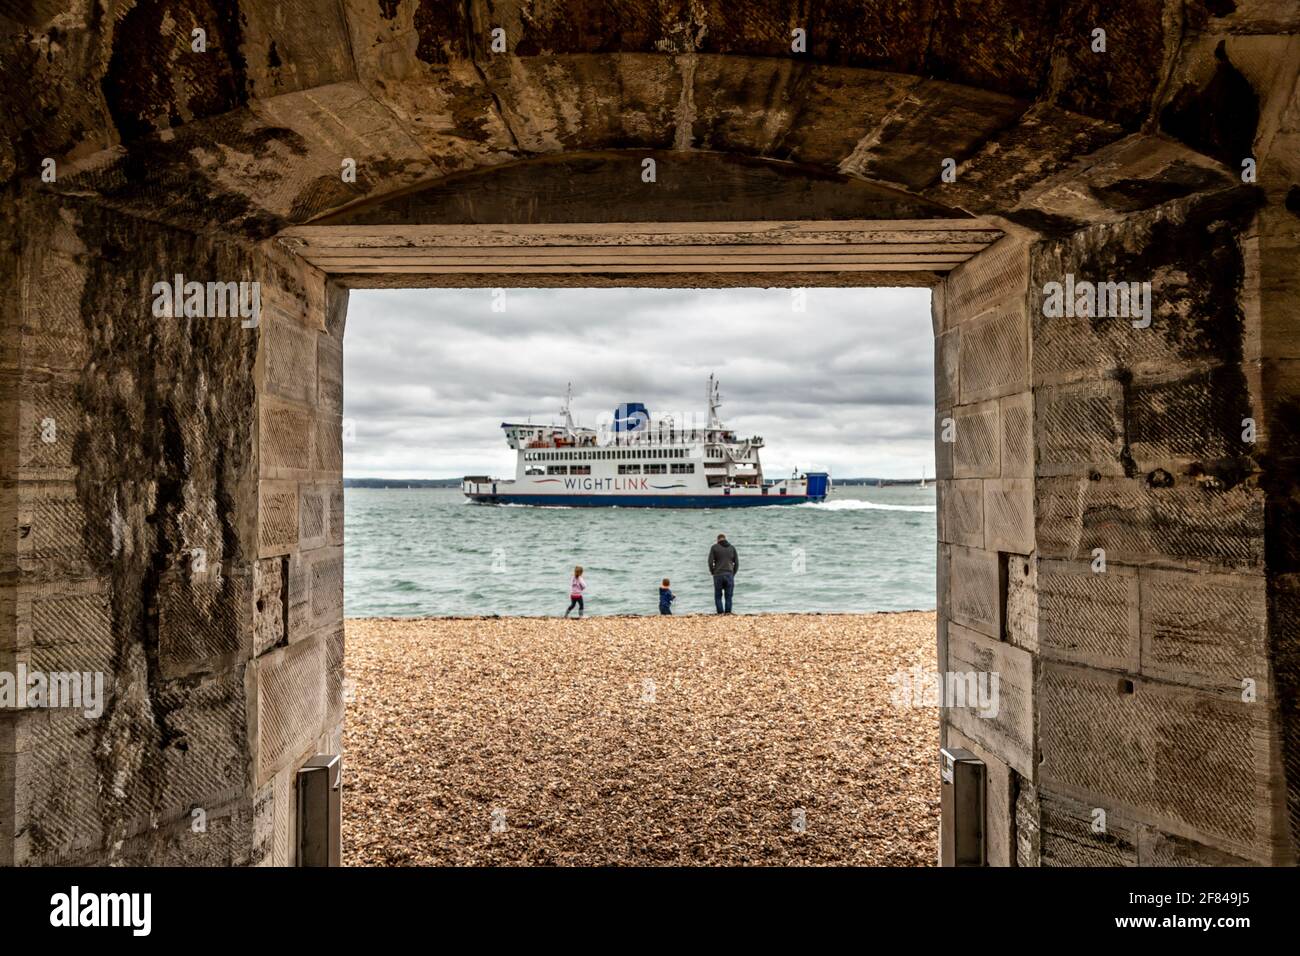 Wightlink Ferry, Portsmouth Harbour, Hampshire Stockfoto